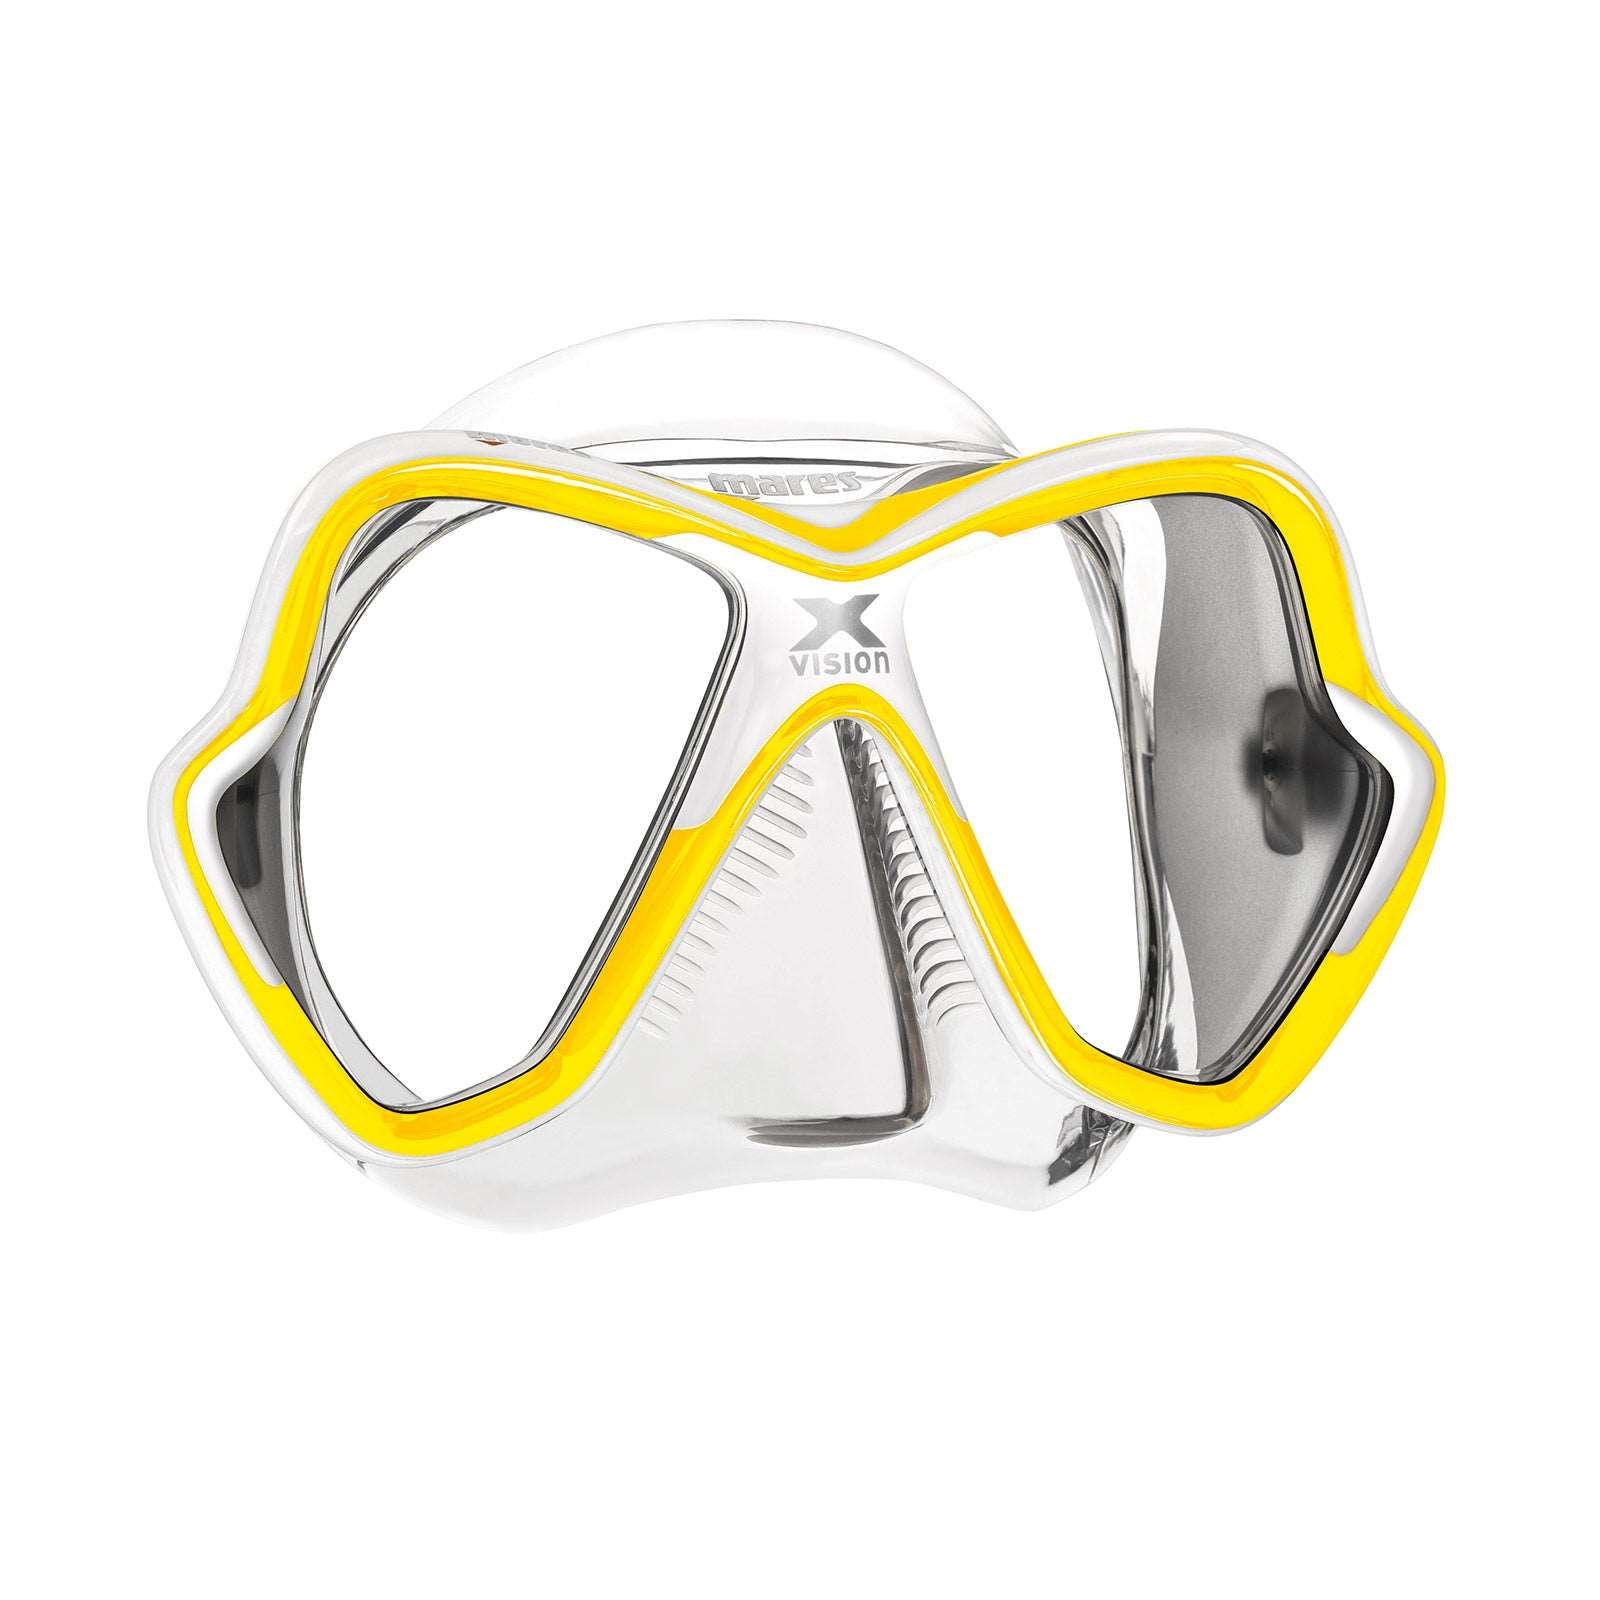 Mares X-Vision Mask